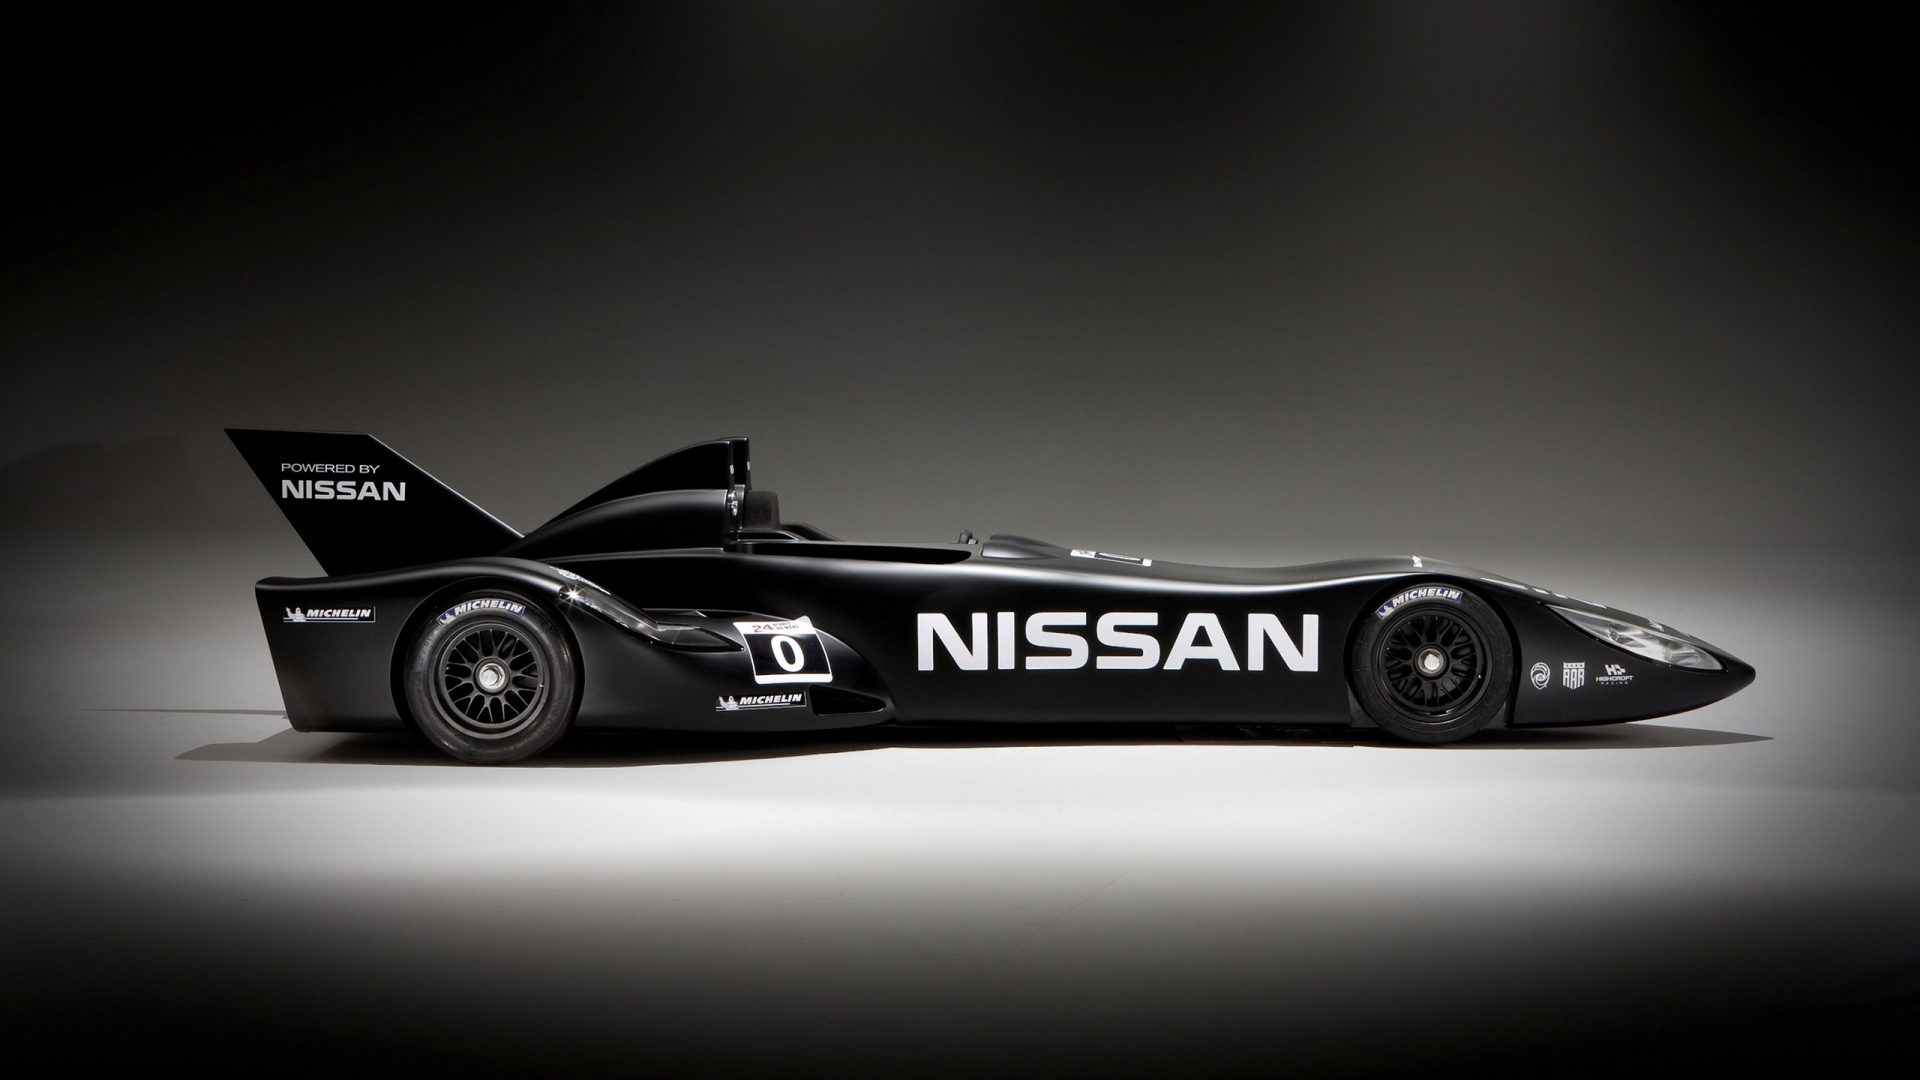 Nissan Deltawing for 1920 x 1080 HDTV 1080p resolution